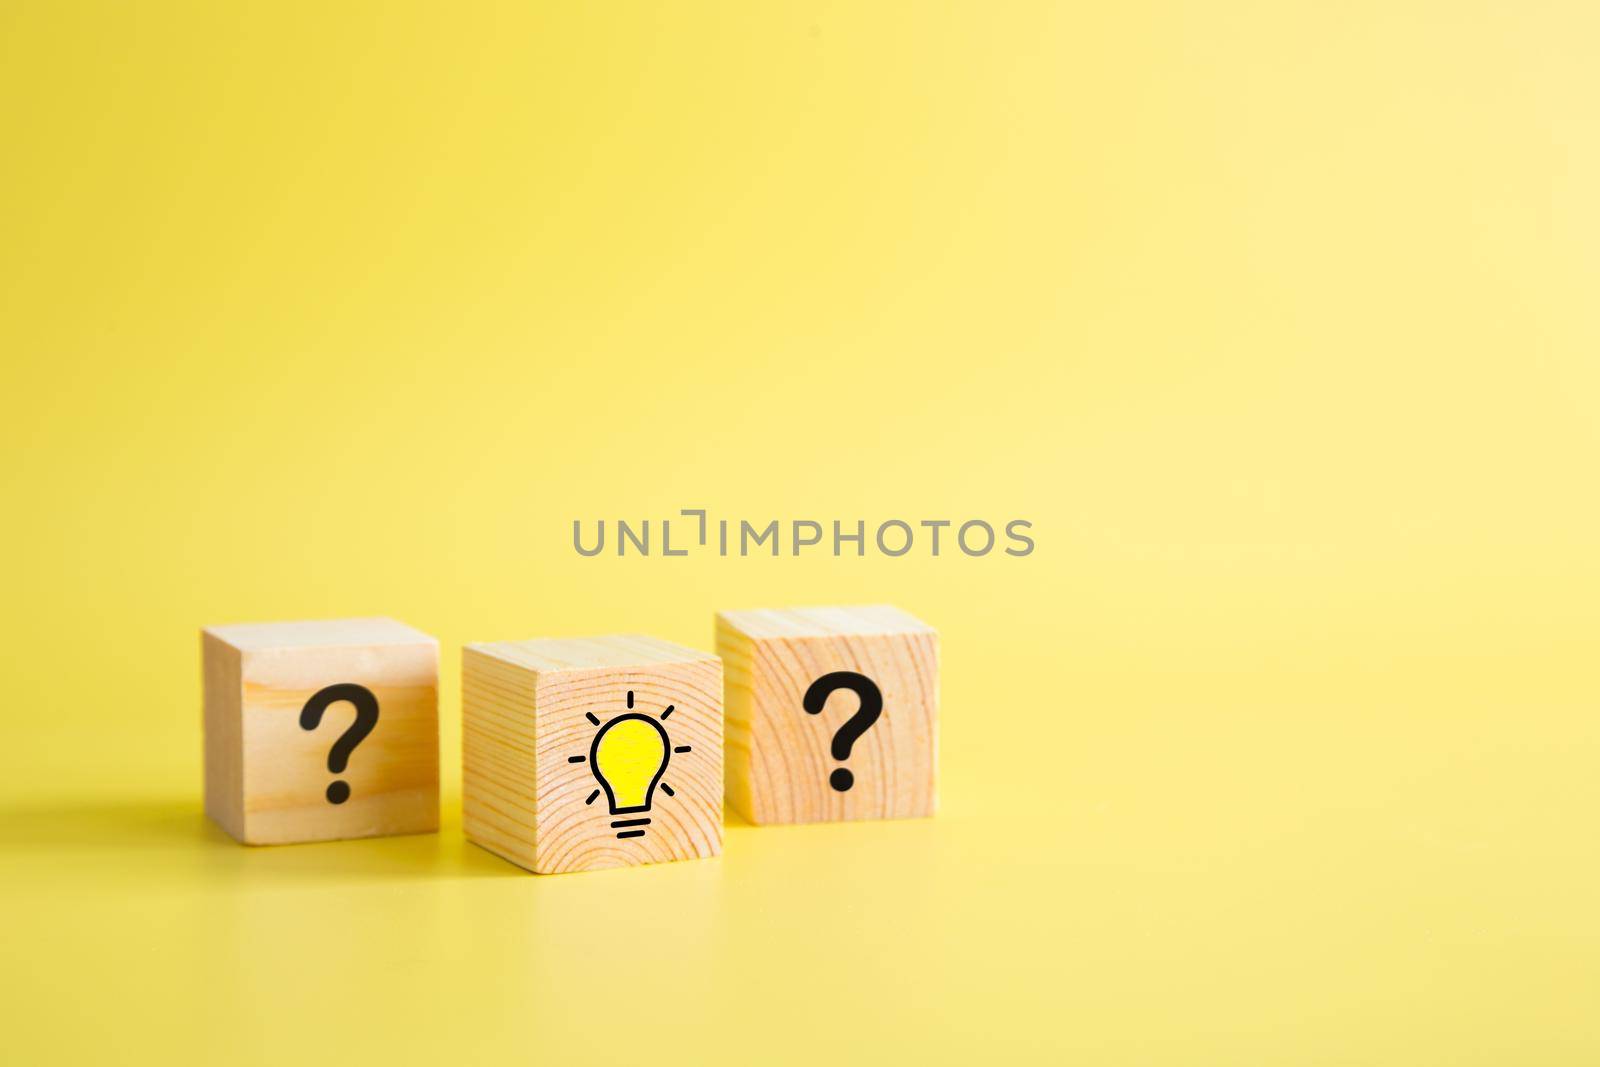 Lightbulb icon and question mark print screen on wooden block cube.  by tehcheesiong